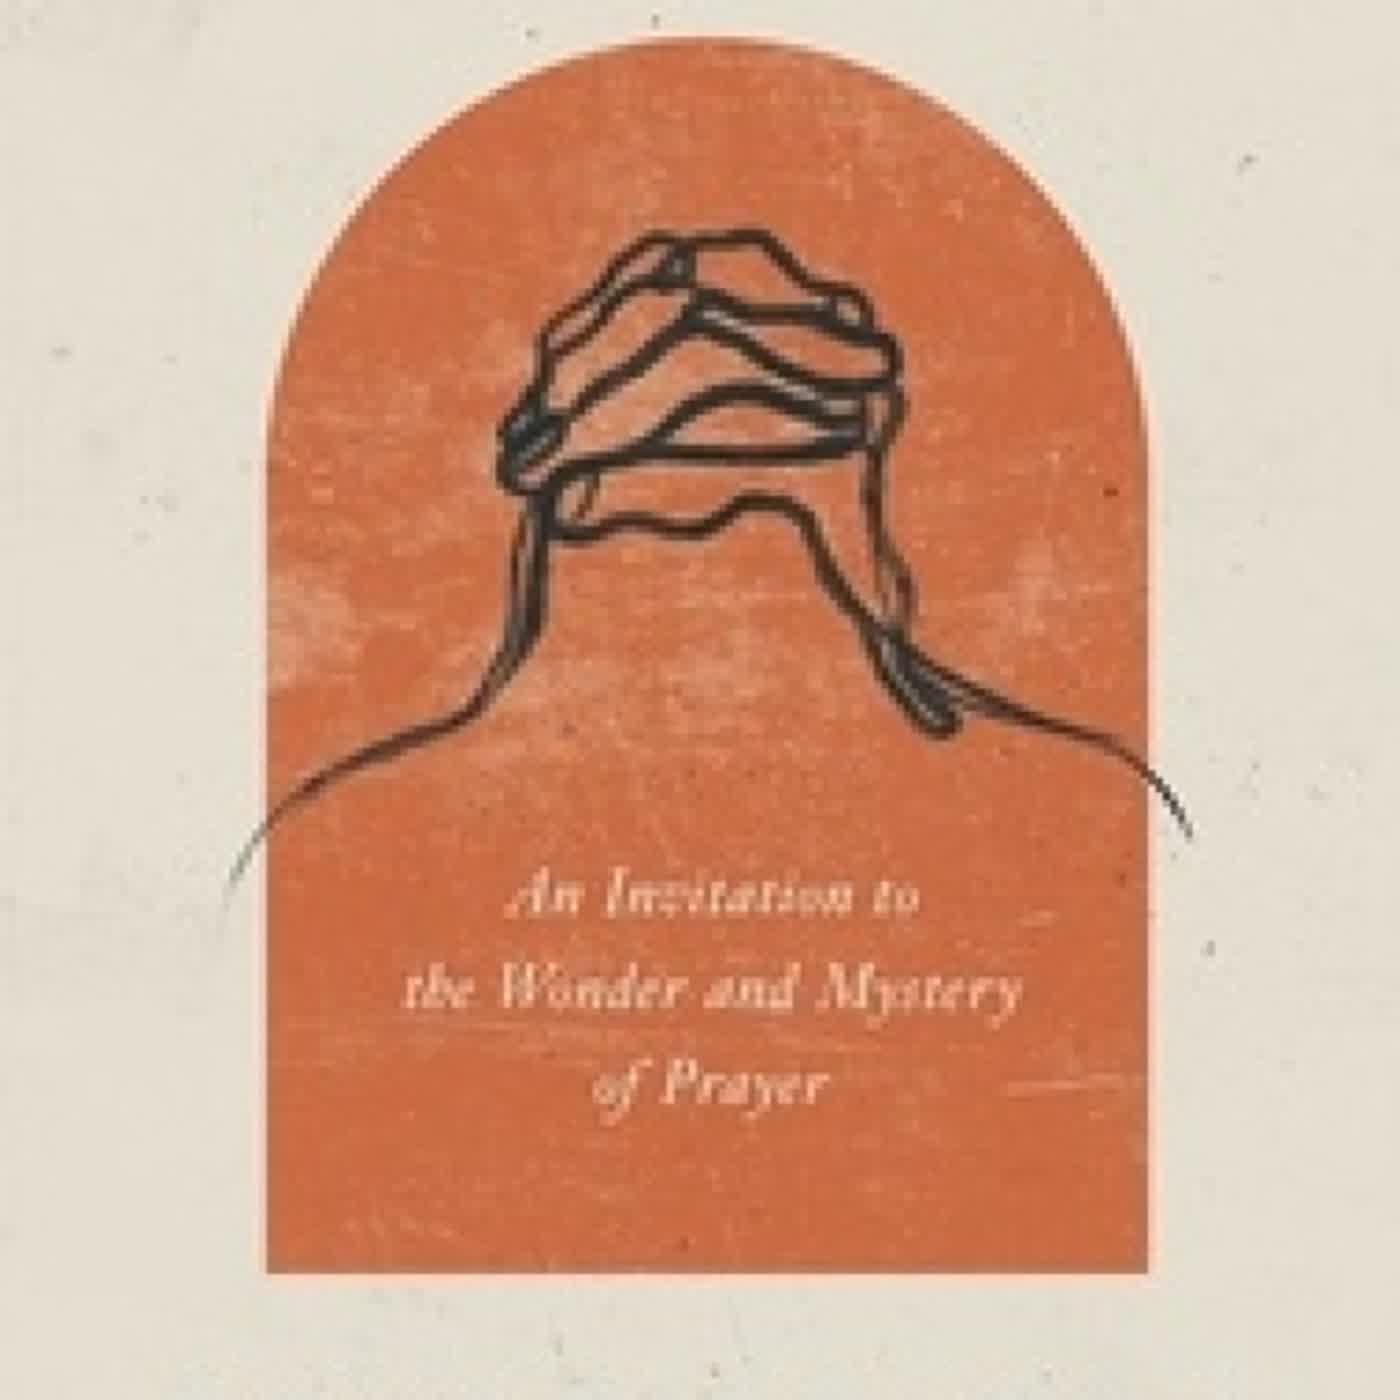 [PDF] Praying Like Monks, Living Like Fools  - An Invitation to the Wonder and Mystery of Prayer by Tyler Staton, Tim Mackie